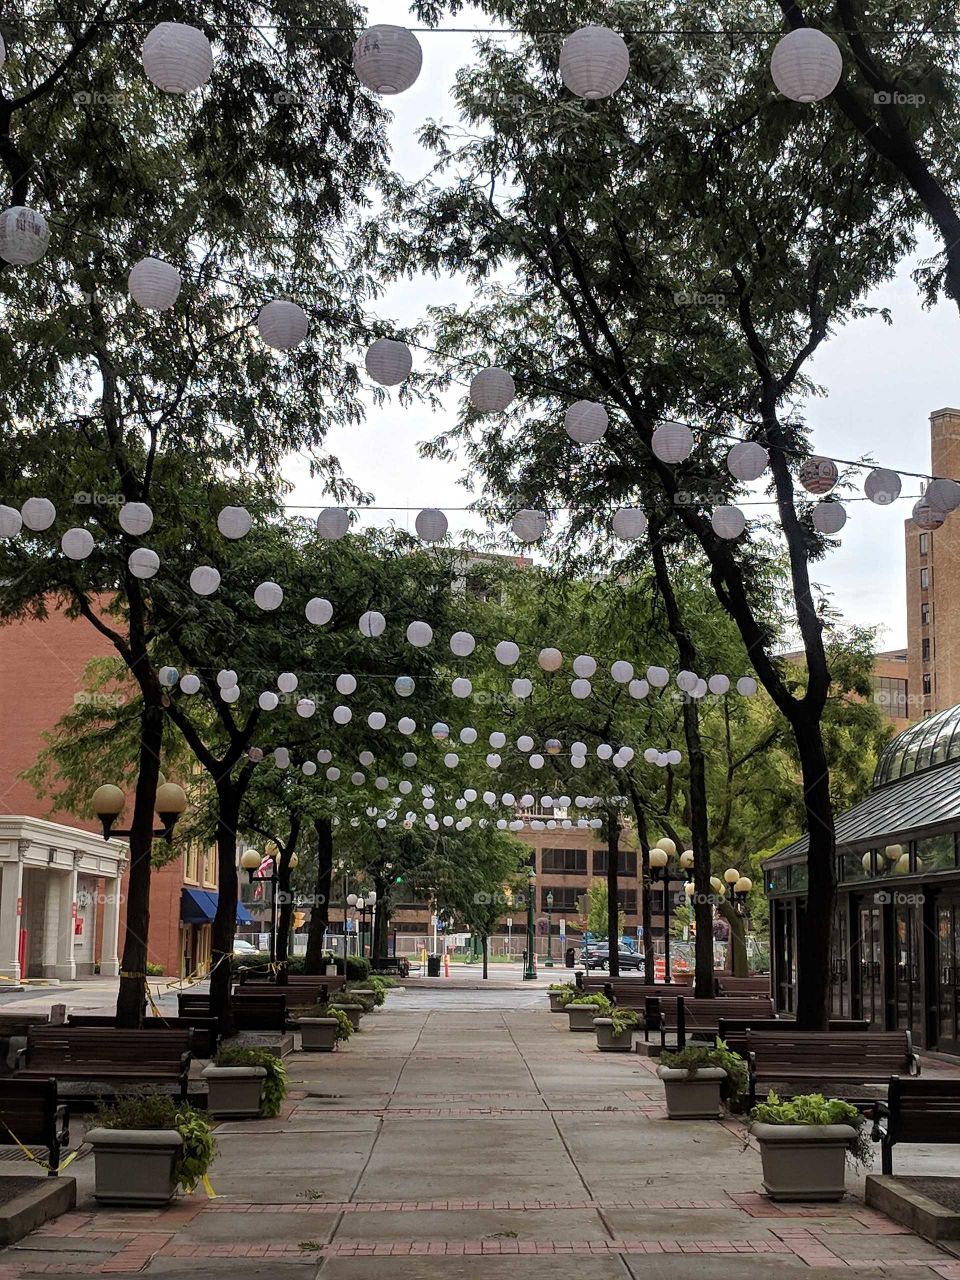 Downtown Syracuse - Paper Lanterns Lining a Tree-Lined Street of Restaurants and Shops